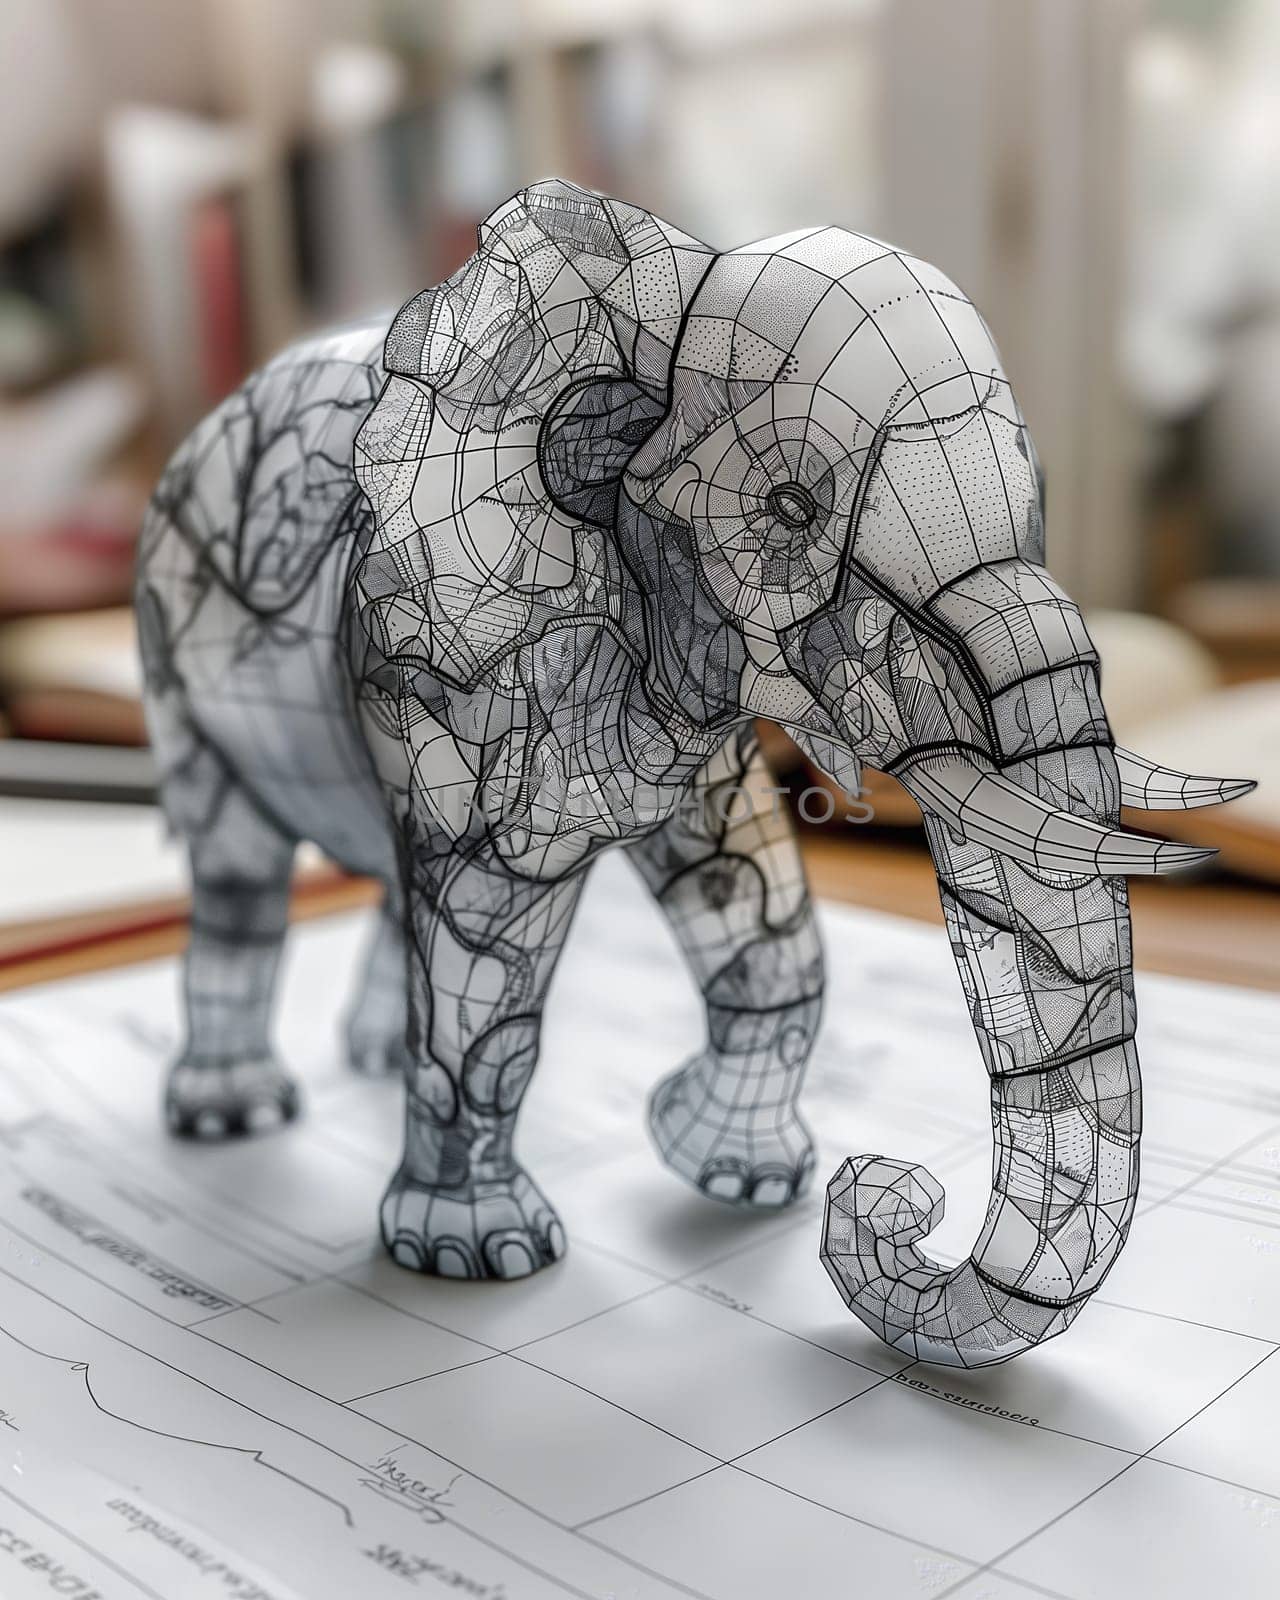 Wireframe Elephant Design in Modern Office. Selective focus.